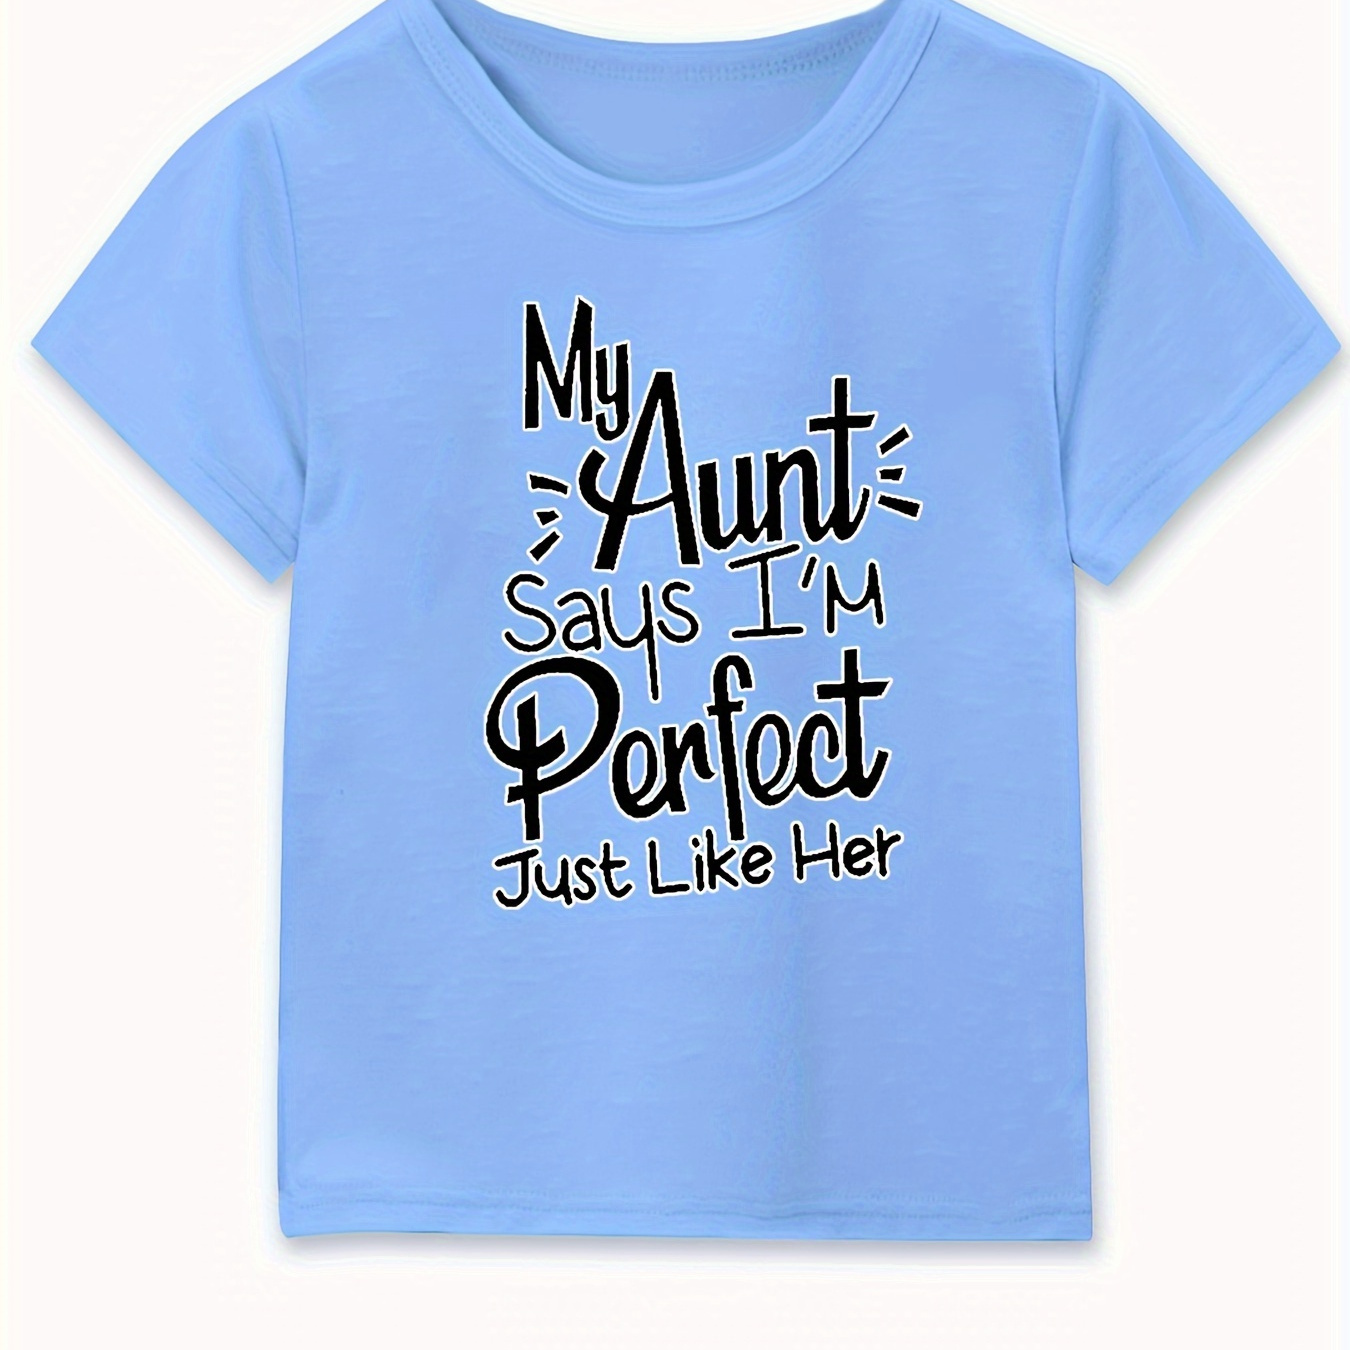 

my Aunt Says I'm Perfect Just Like Her" Funny Letter Print Boys Creative T-shirt, Casual Lightweight Comfy Short Sleeve Tee Tops, Kids Clothings For Summer